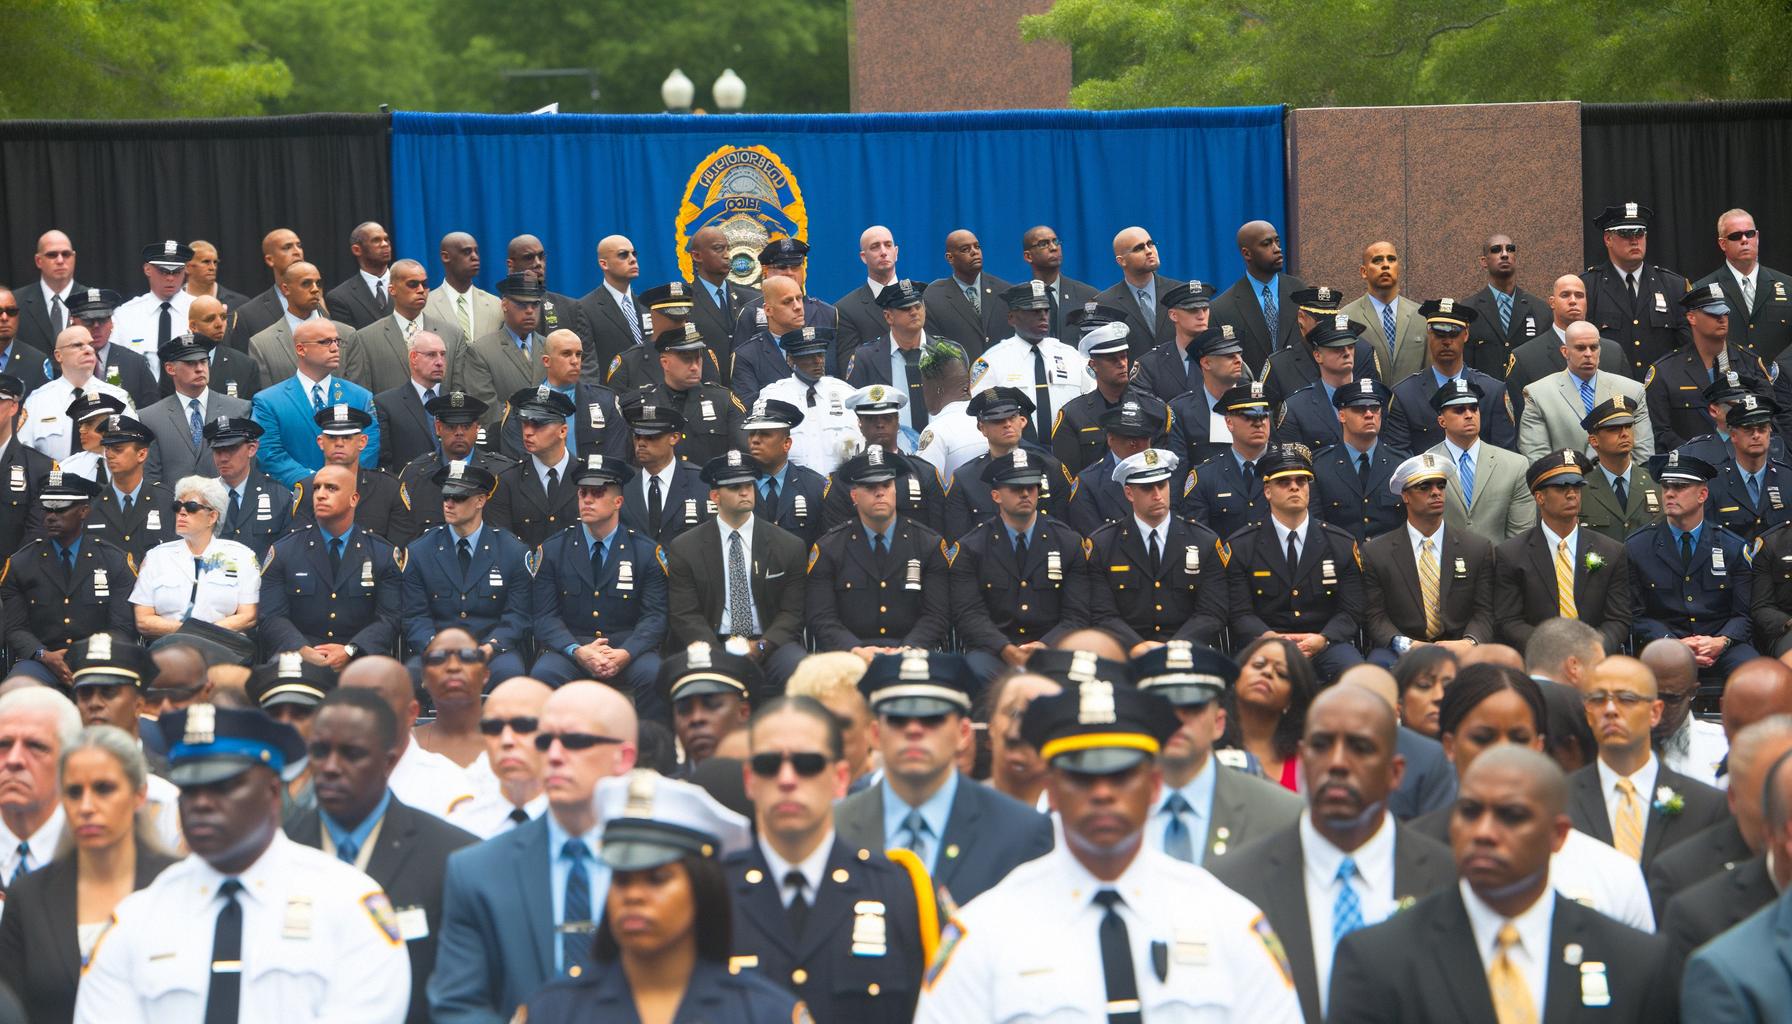 National Police Week honors the sacrifices and risks of law enforcement.